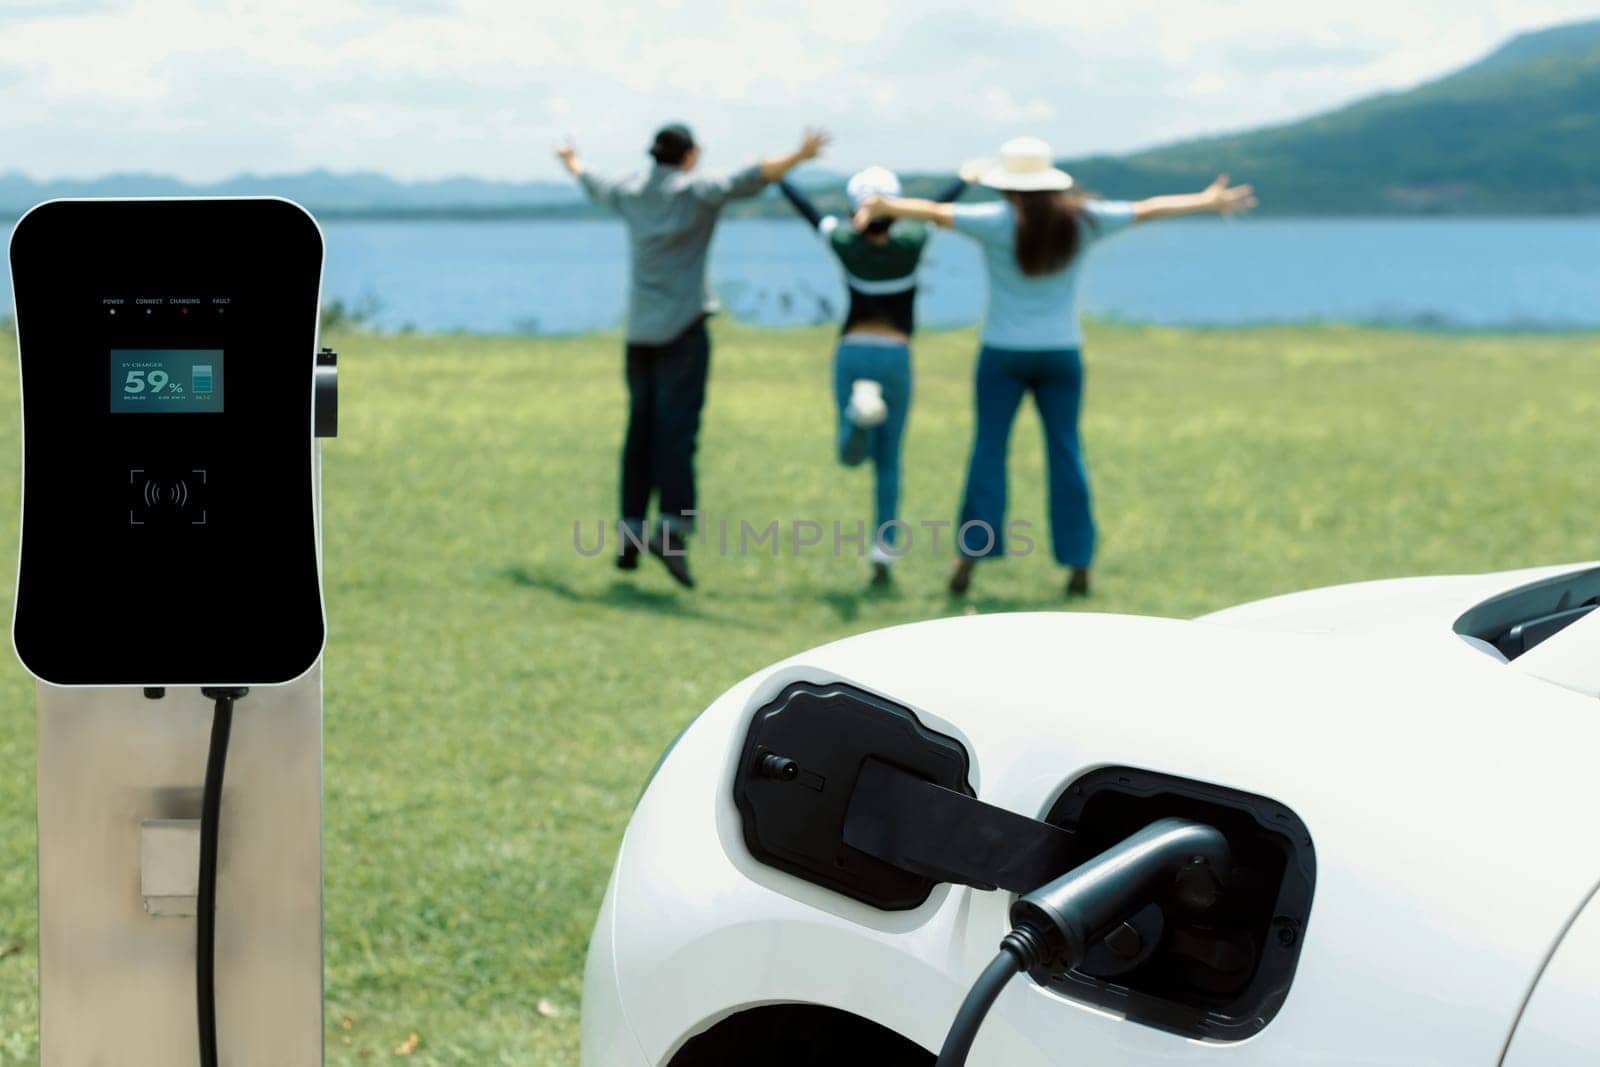 Concept of progressive happy family enjoying their time at green field and lake with electric vehicle. Electric vehicle driven by clean renewable from eco-friendly power sauce.